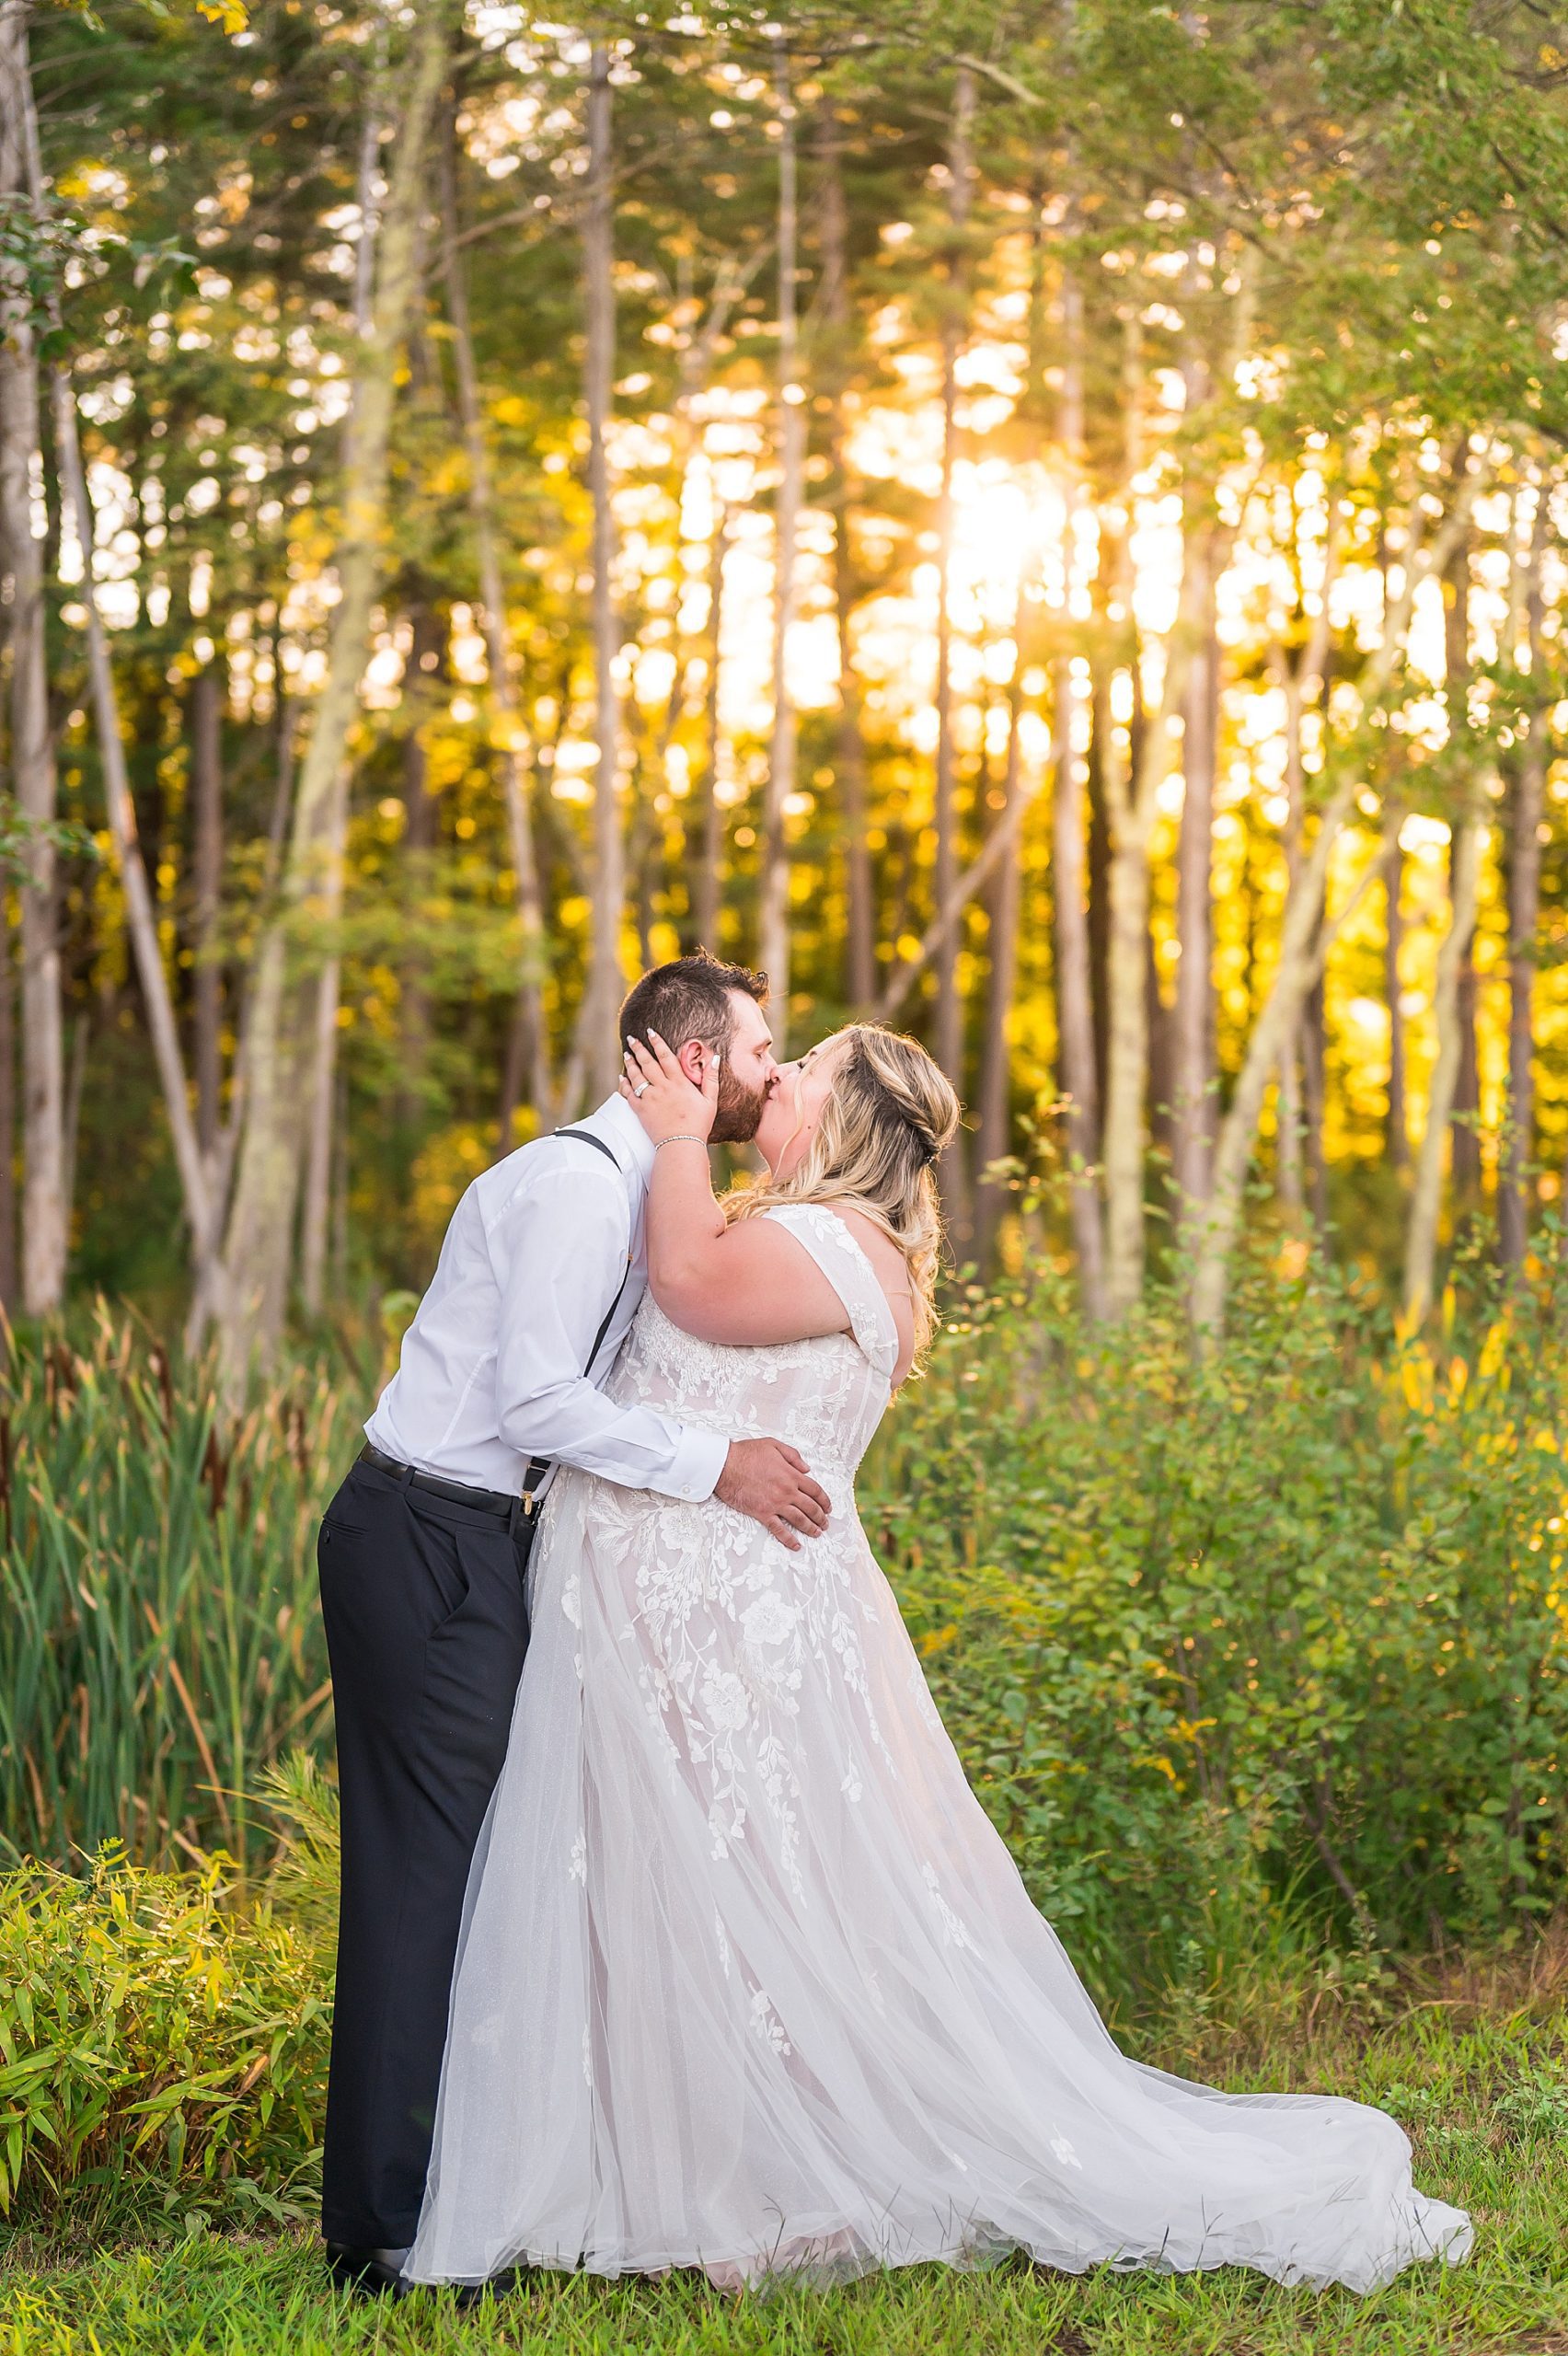 newlyweds kiss by woodline with sun streaming in the background